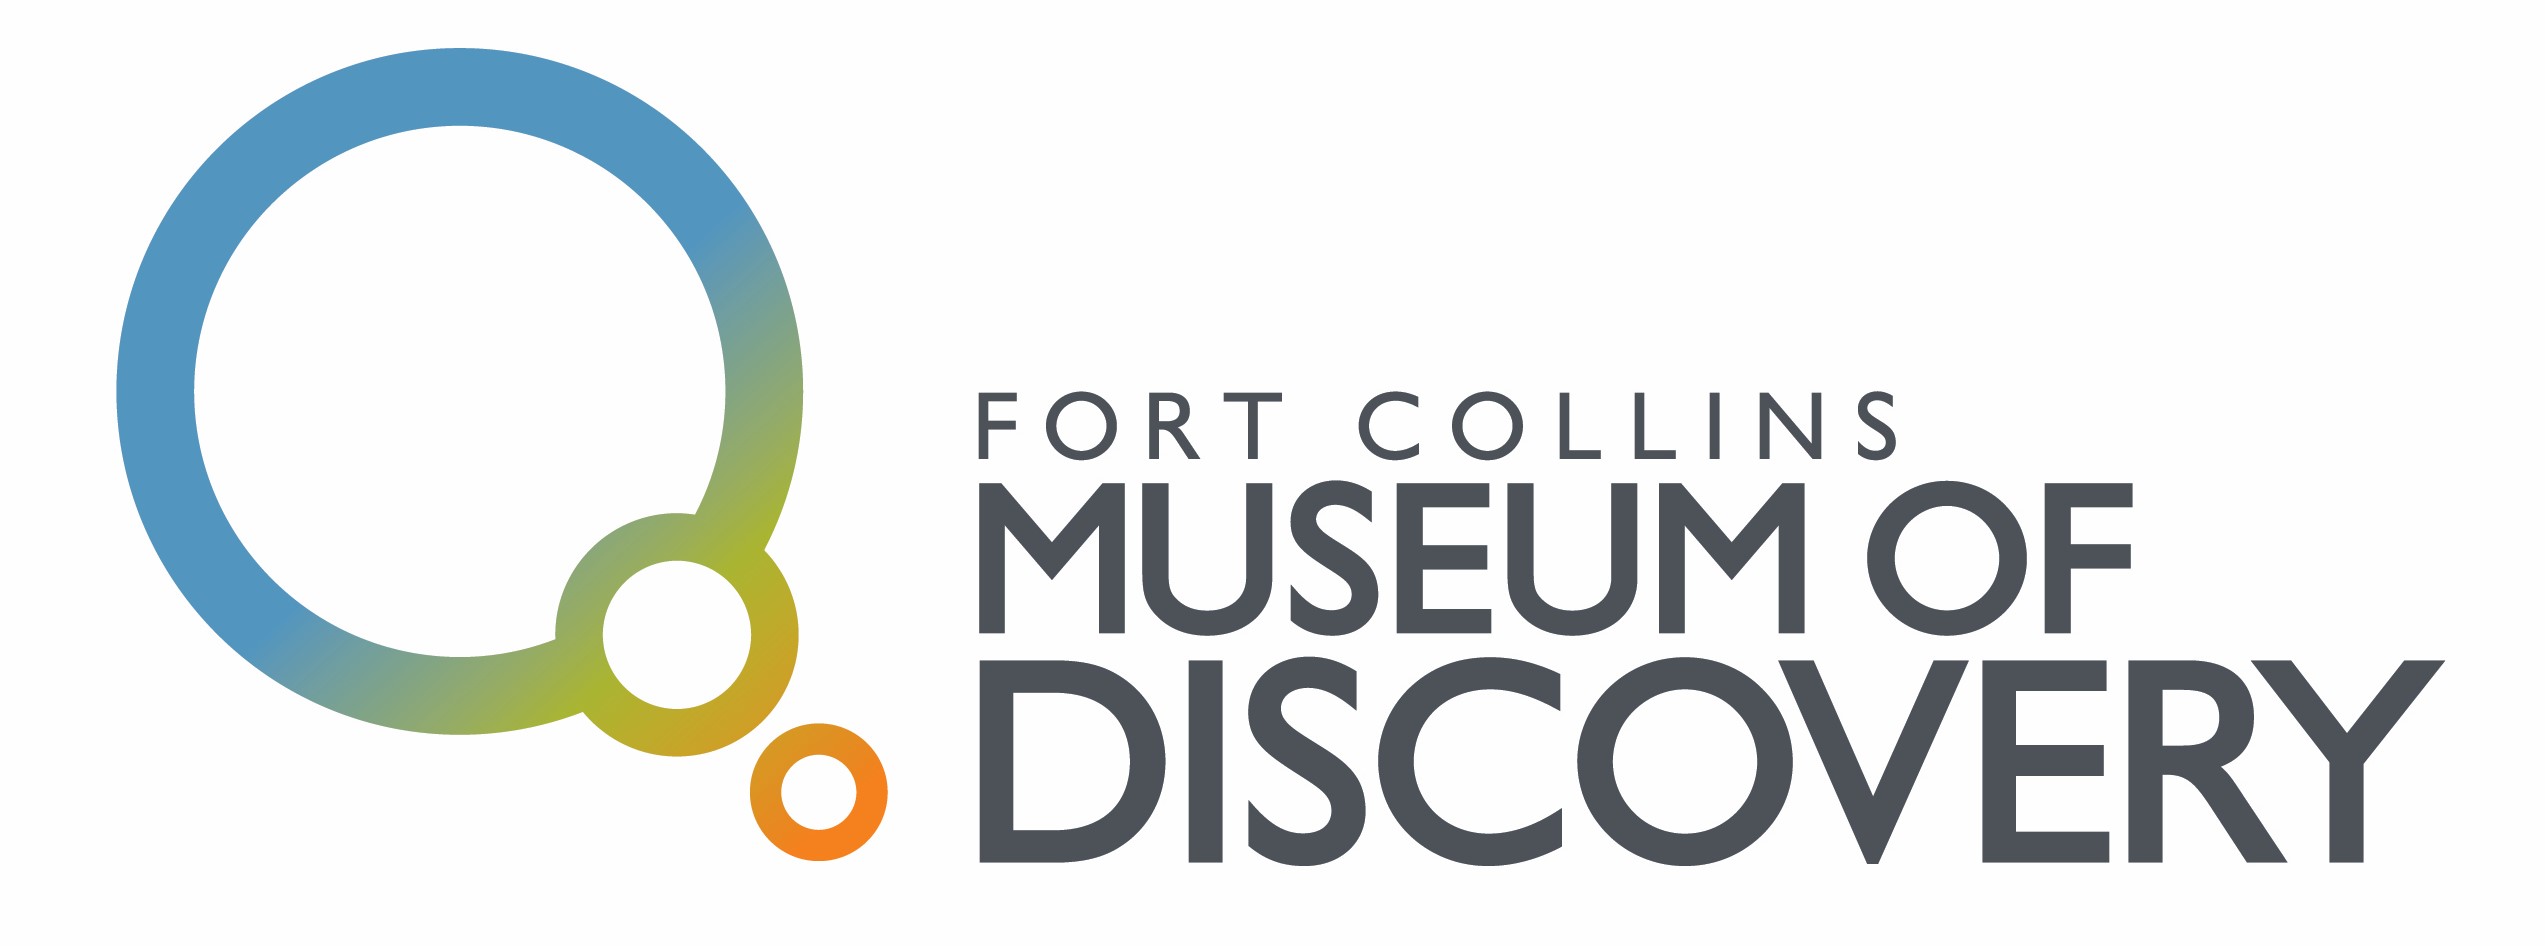 denver museum of nature and science logo